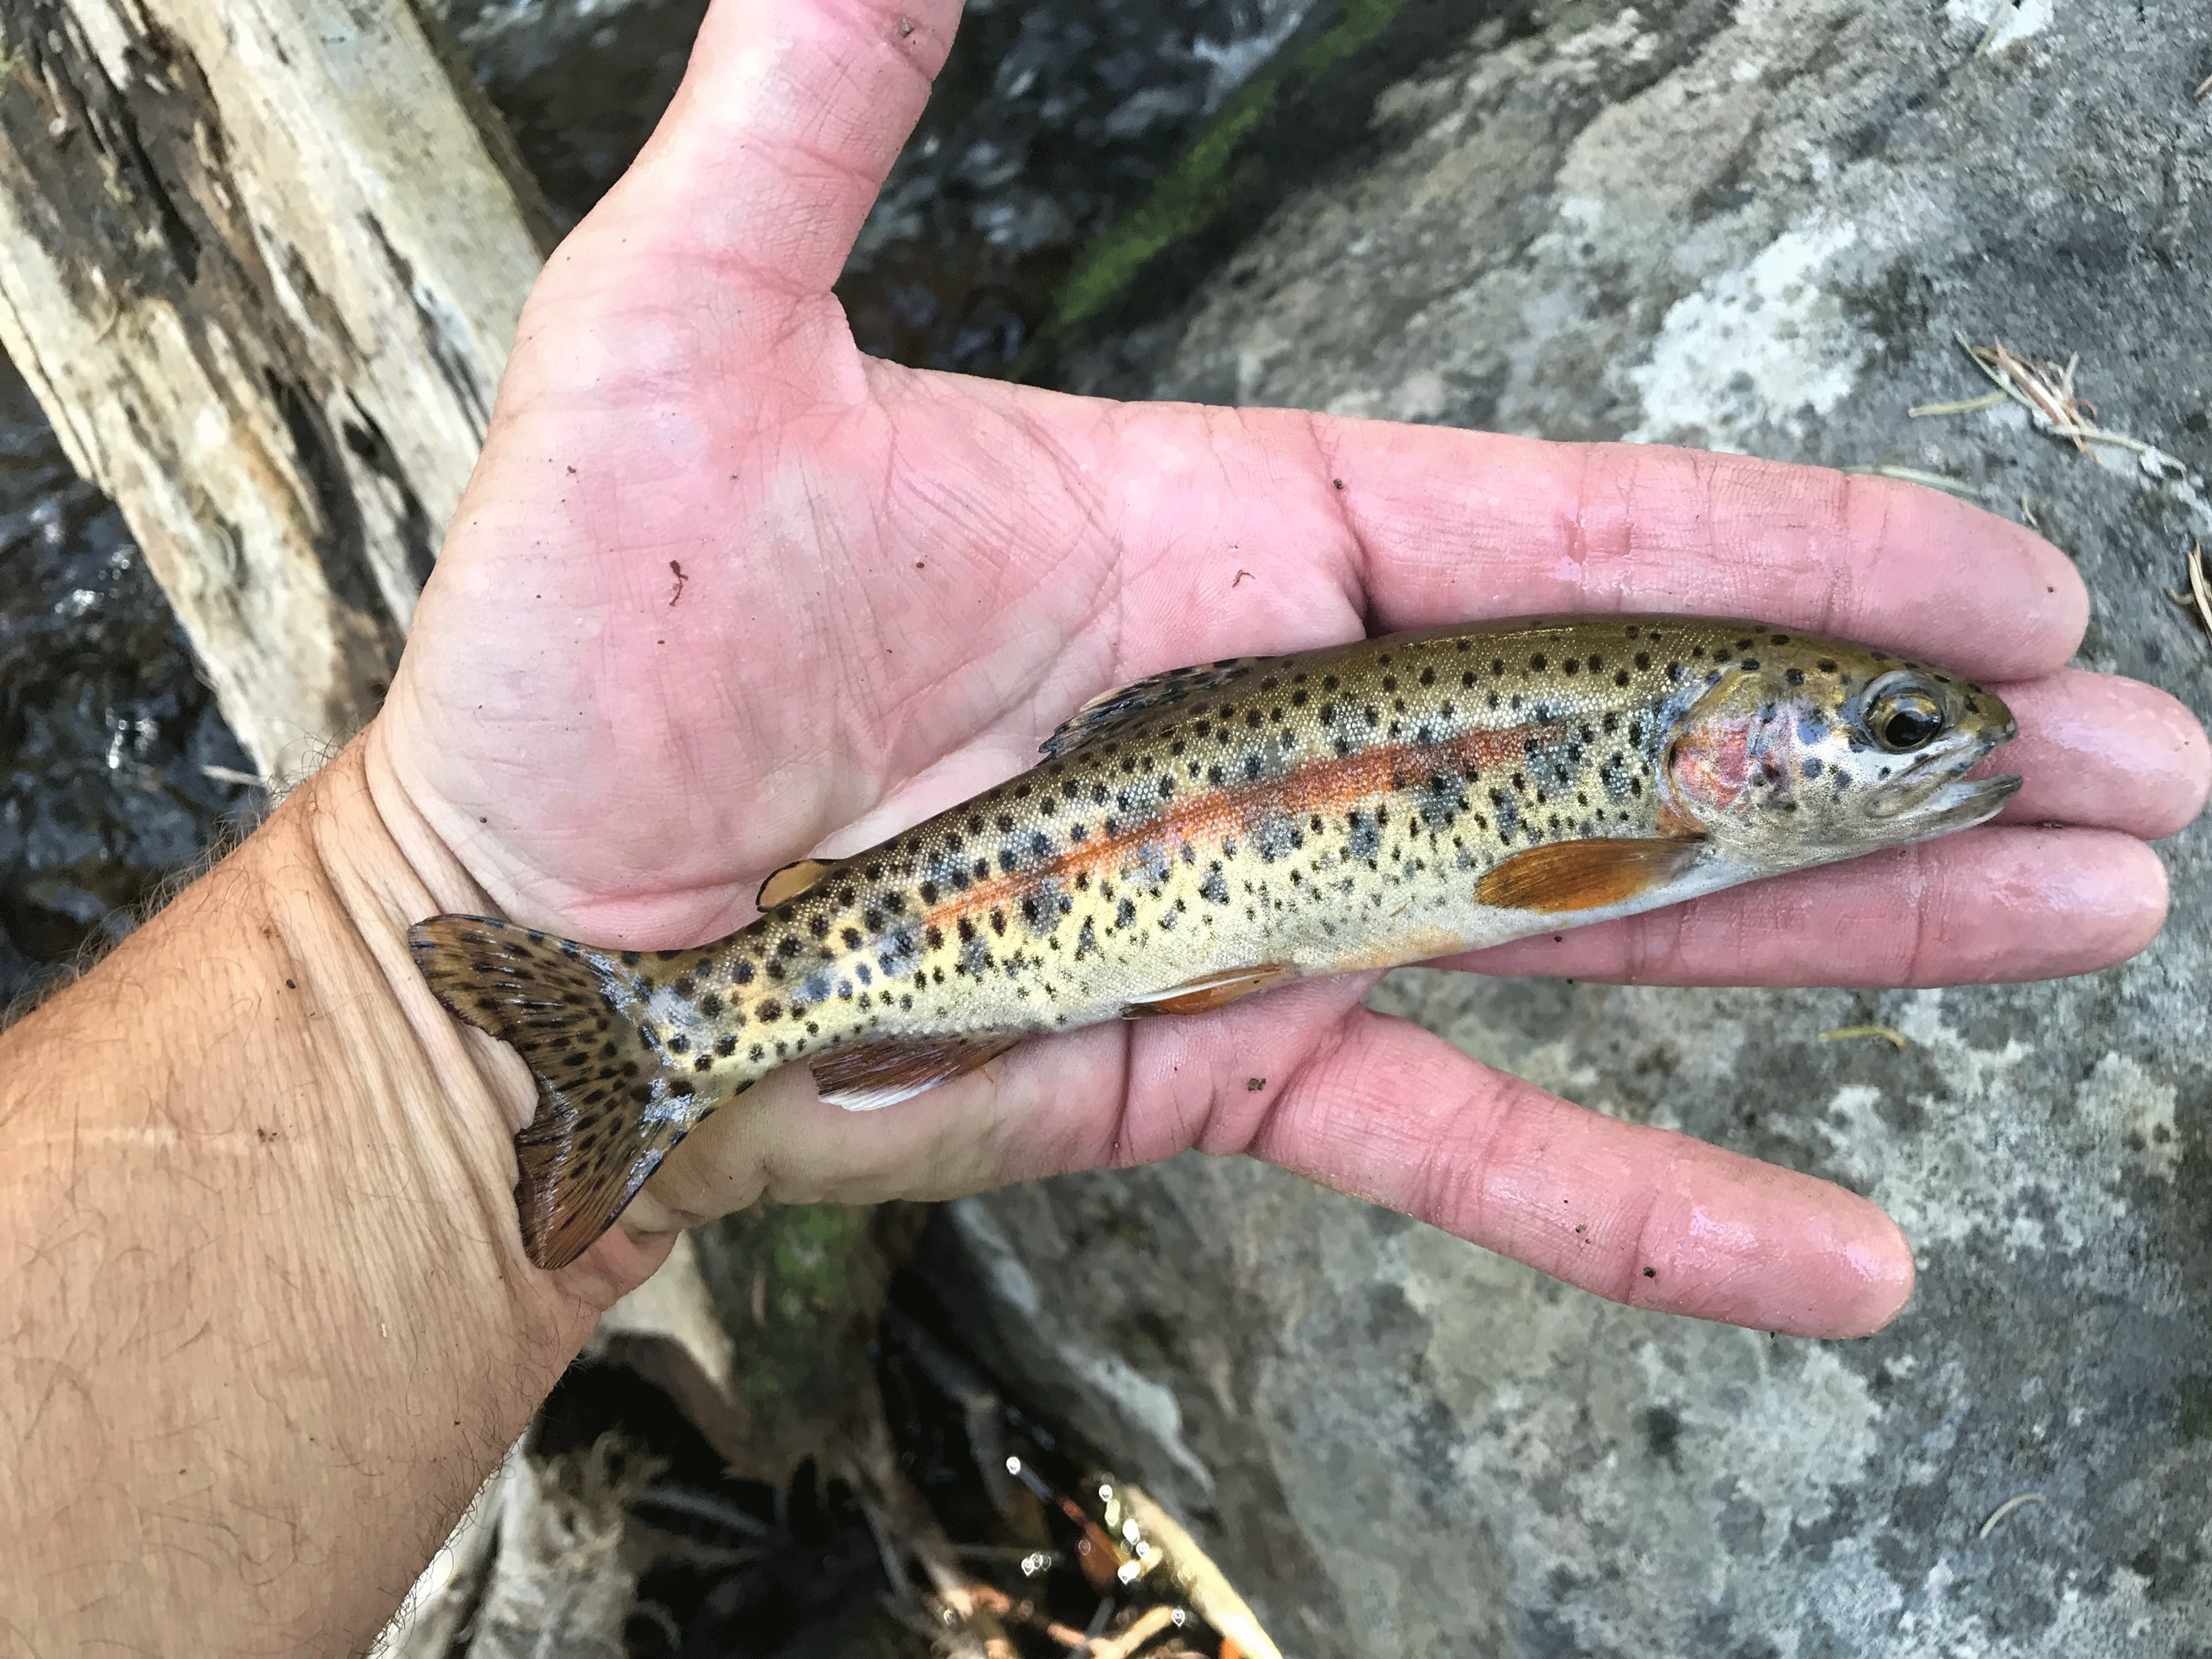 The McCloud River Redband Trout is known as “cali sulat” in the Winnemem Wintu language, with “cali” meaning good or beautiful and “sulat” the term for trout. (Steve MacMillan)